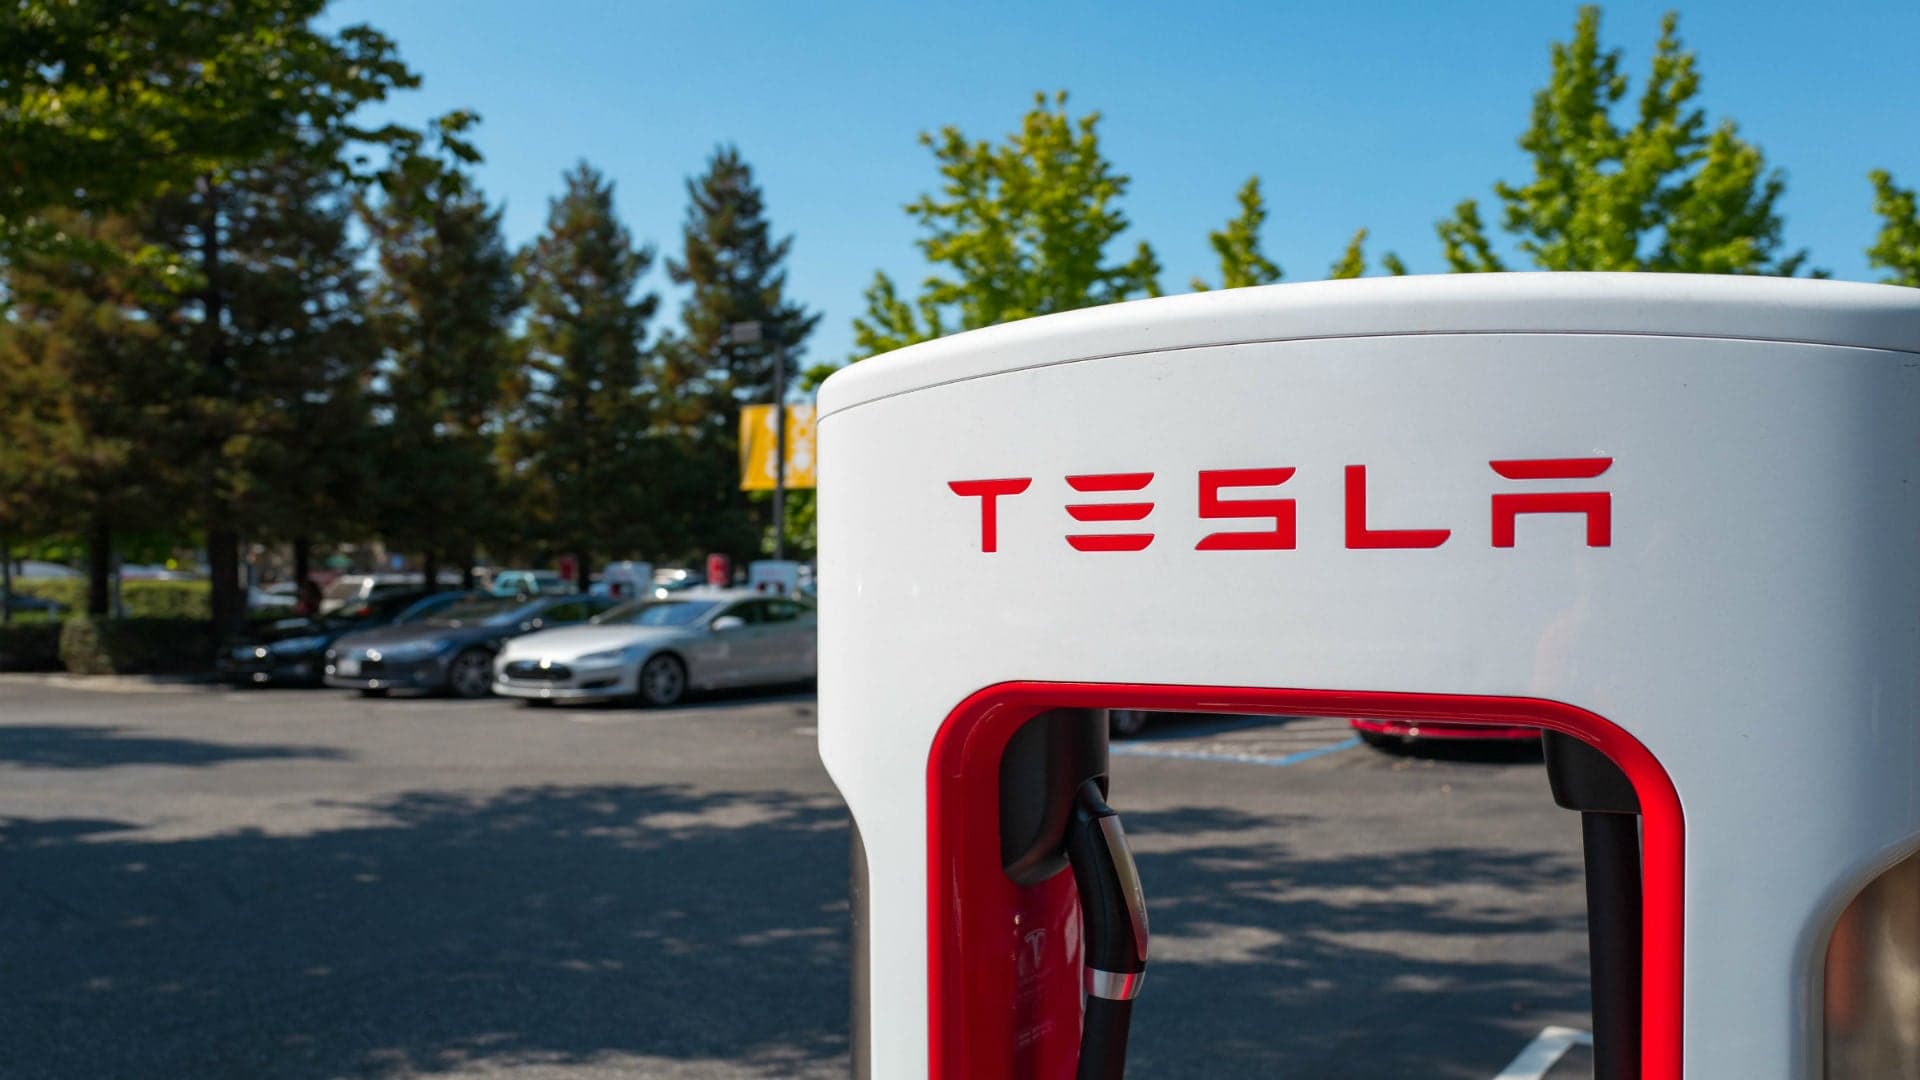 Solar Eclipse Traffic Made Tesla Supercharging Almost Impossible in Some Places